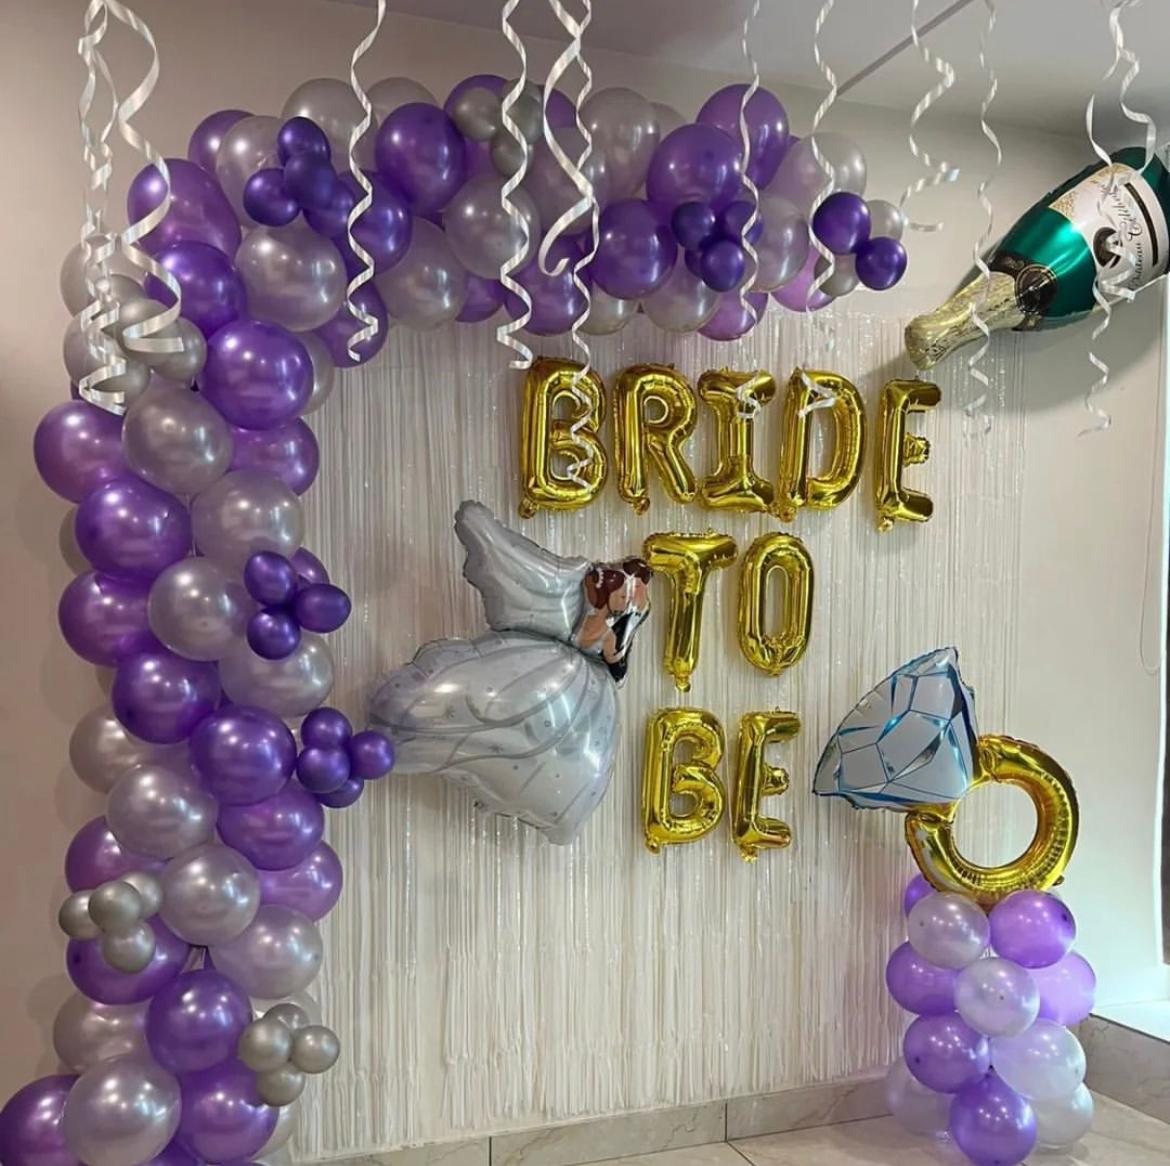 bride to be wall decor